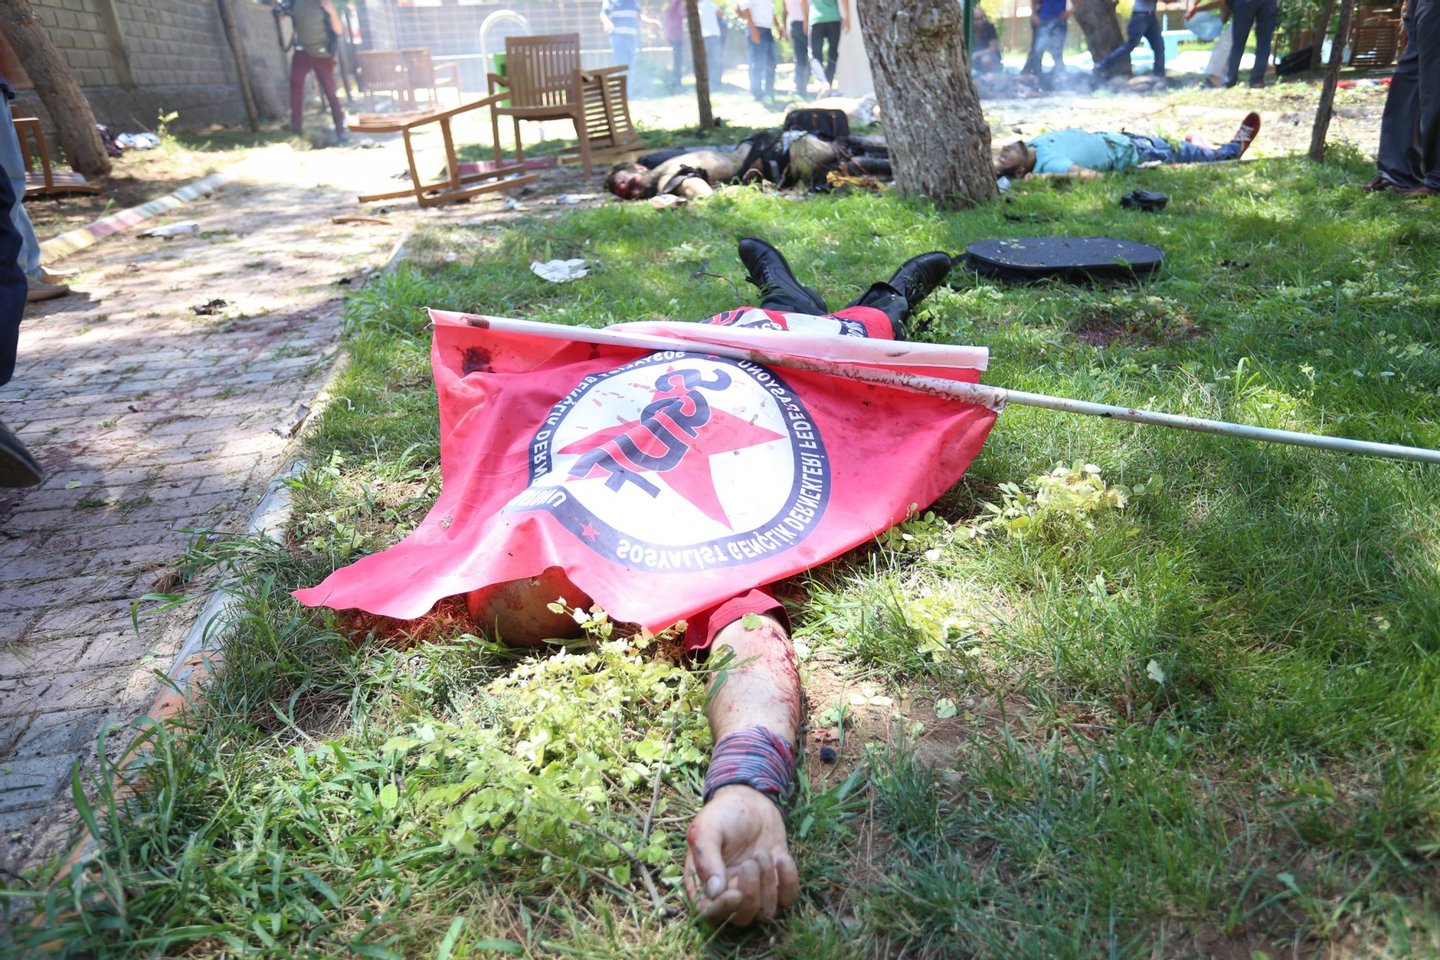 This photo taken on July 20, 2015 shows bodies on the ground after an explosion in the town of Suruc, on July 20, 2015, not far from the Syrian border. At least 20 people were killed and dozens injured, with the origin of the explosion not immediately determined, but many authorities and Turkish media claiming the attack to be carried out by a suicide bomber. AFP PHOTO / TURKEY OUT / OZCAN SOYSAL / DEPO PHOTOS        (Photo credit should read DEPO PHOTOS/AFP/Getty Images)